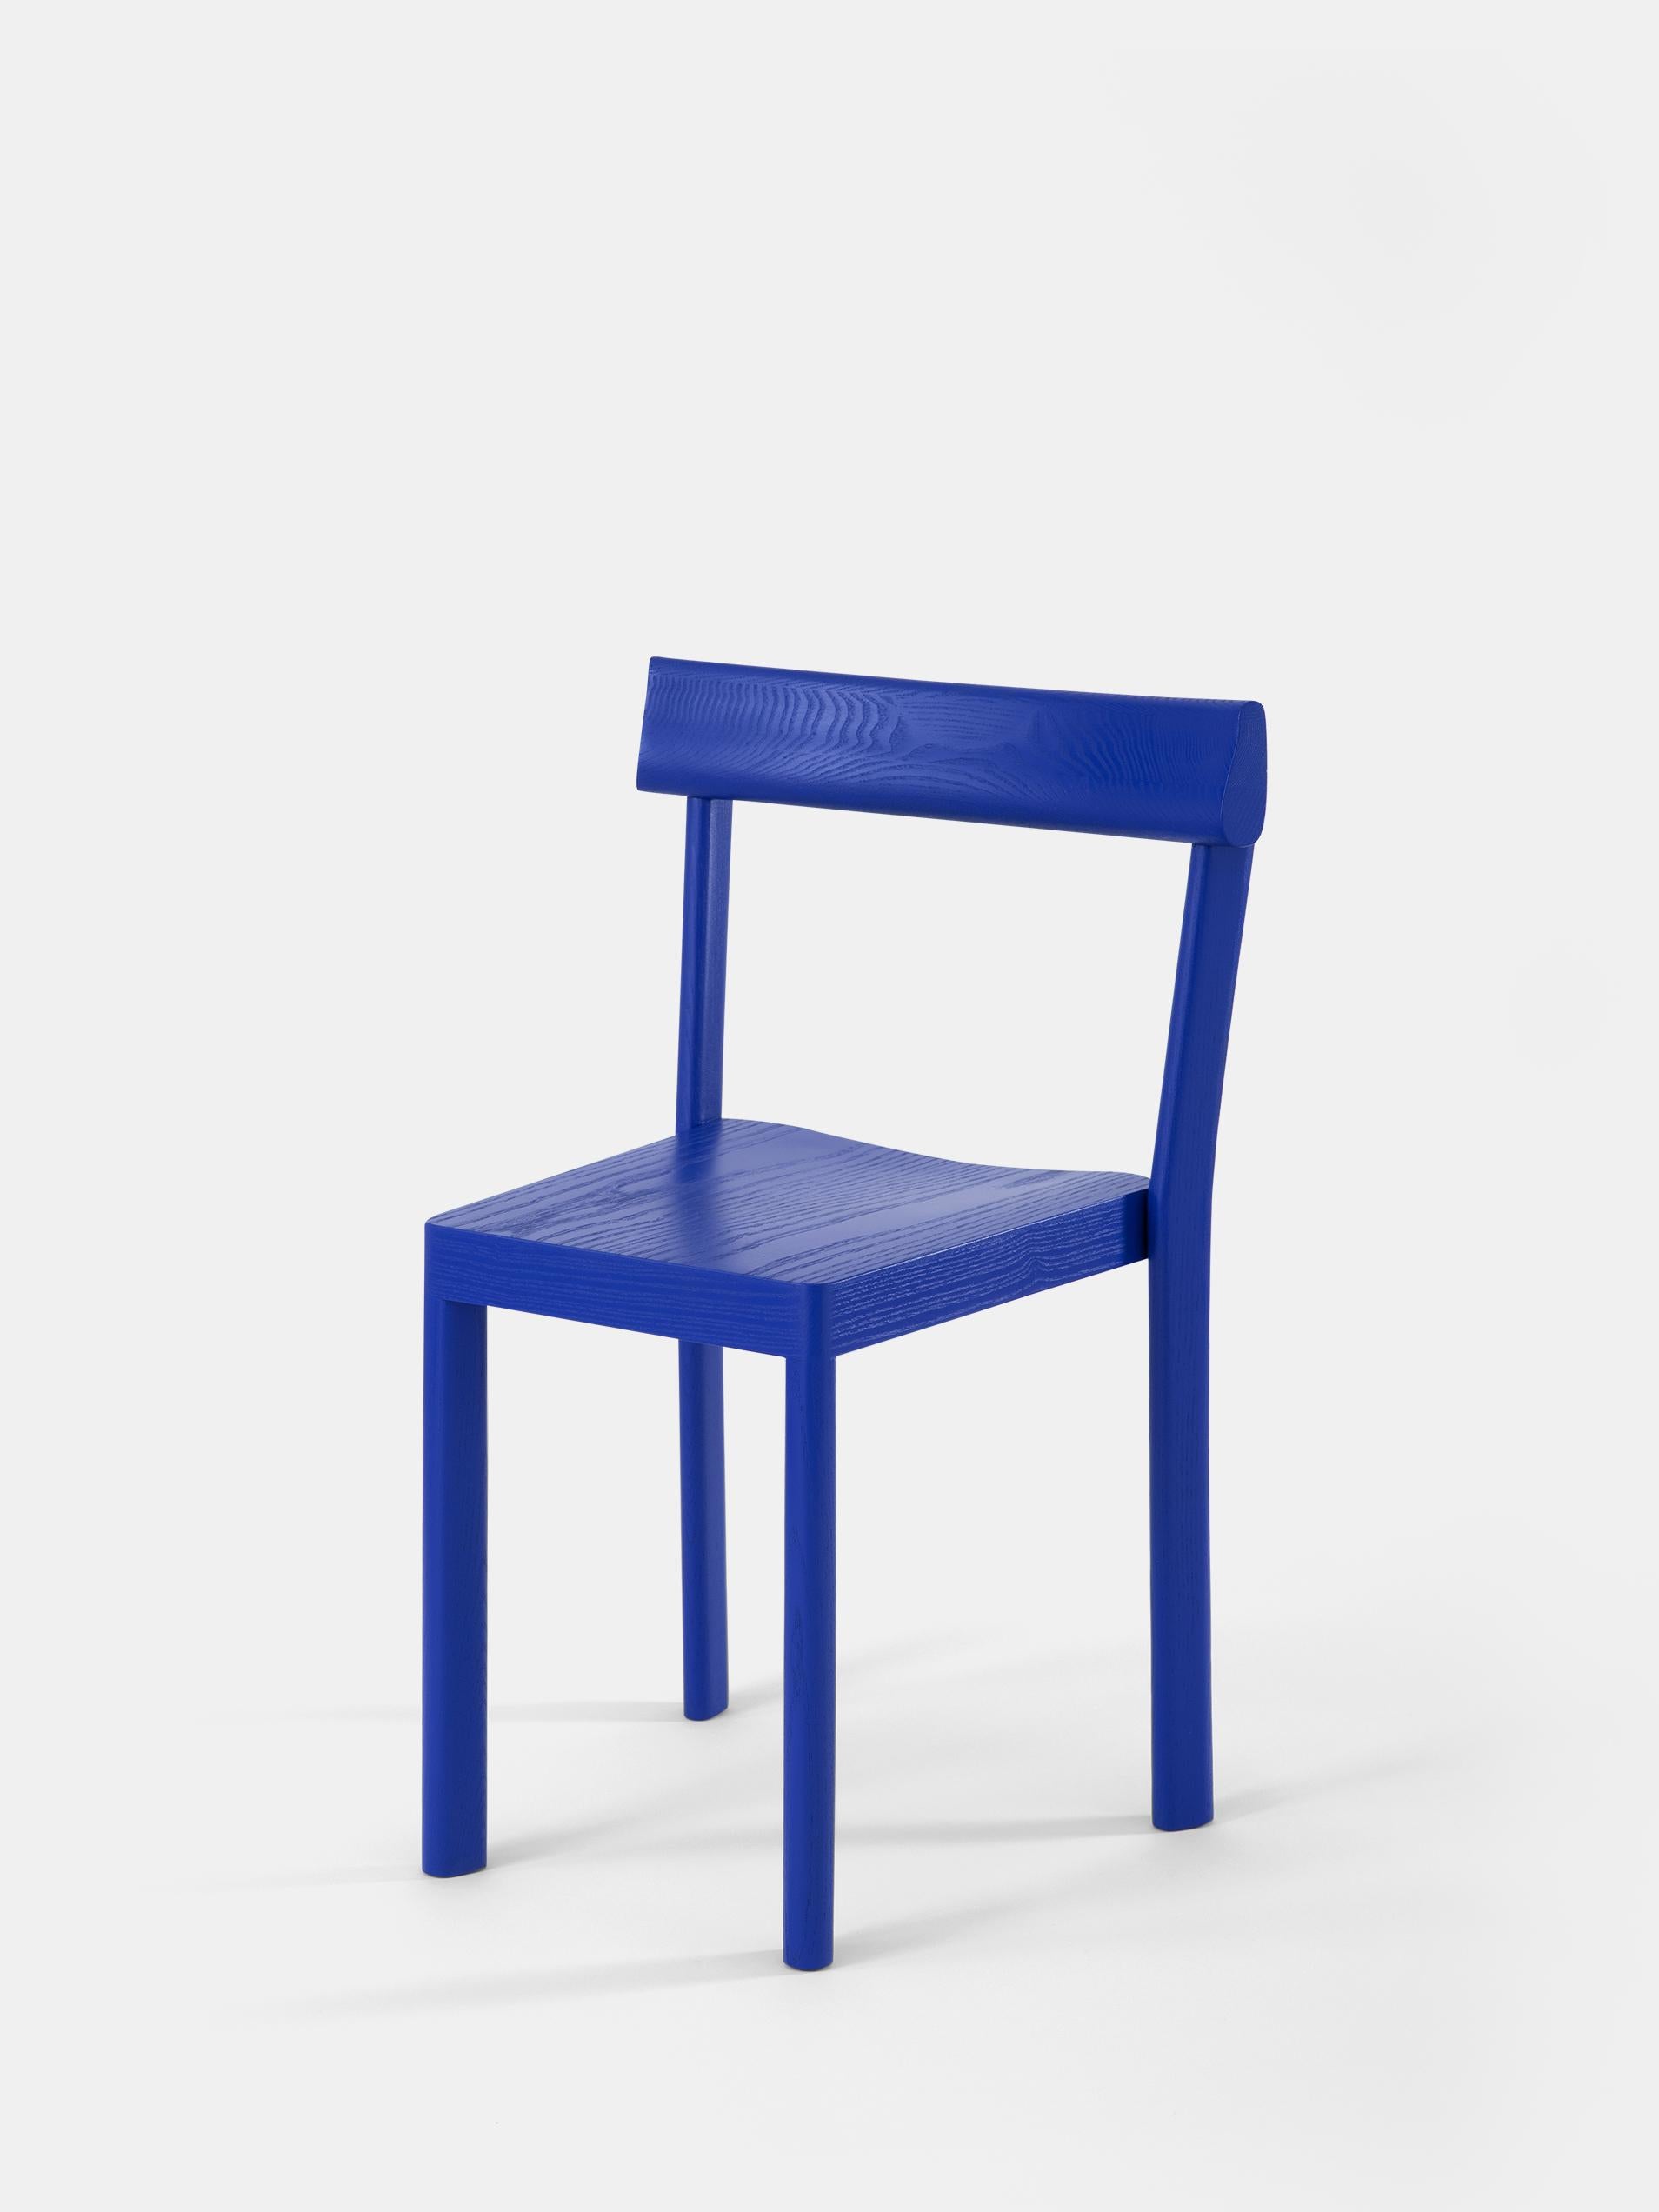 Set of 6 Galta Blue Oak Chairs by Kann Design
Dimensions: D 43 x W 51 x H 80 cm.
Materials: Blue lacquered oak.
Available in other finishes.

With the Galta, SCMP Design Office rethinks the classic bistro chair. The result is the epitome of